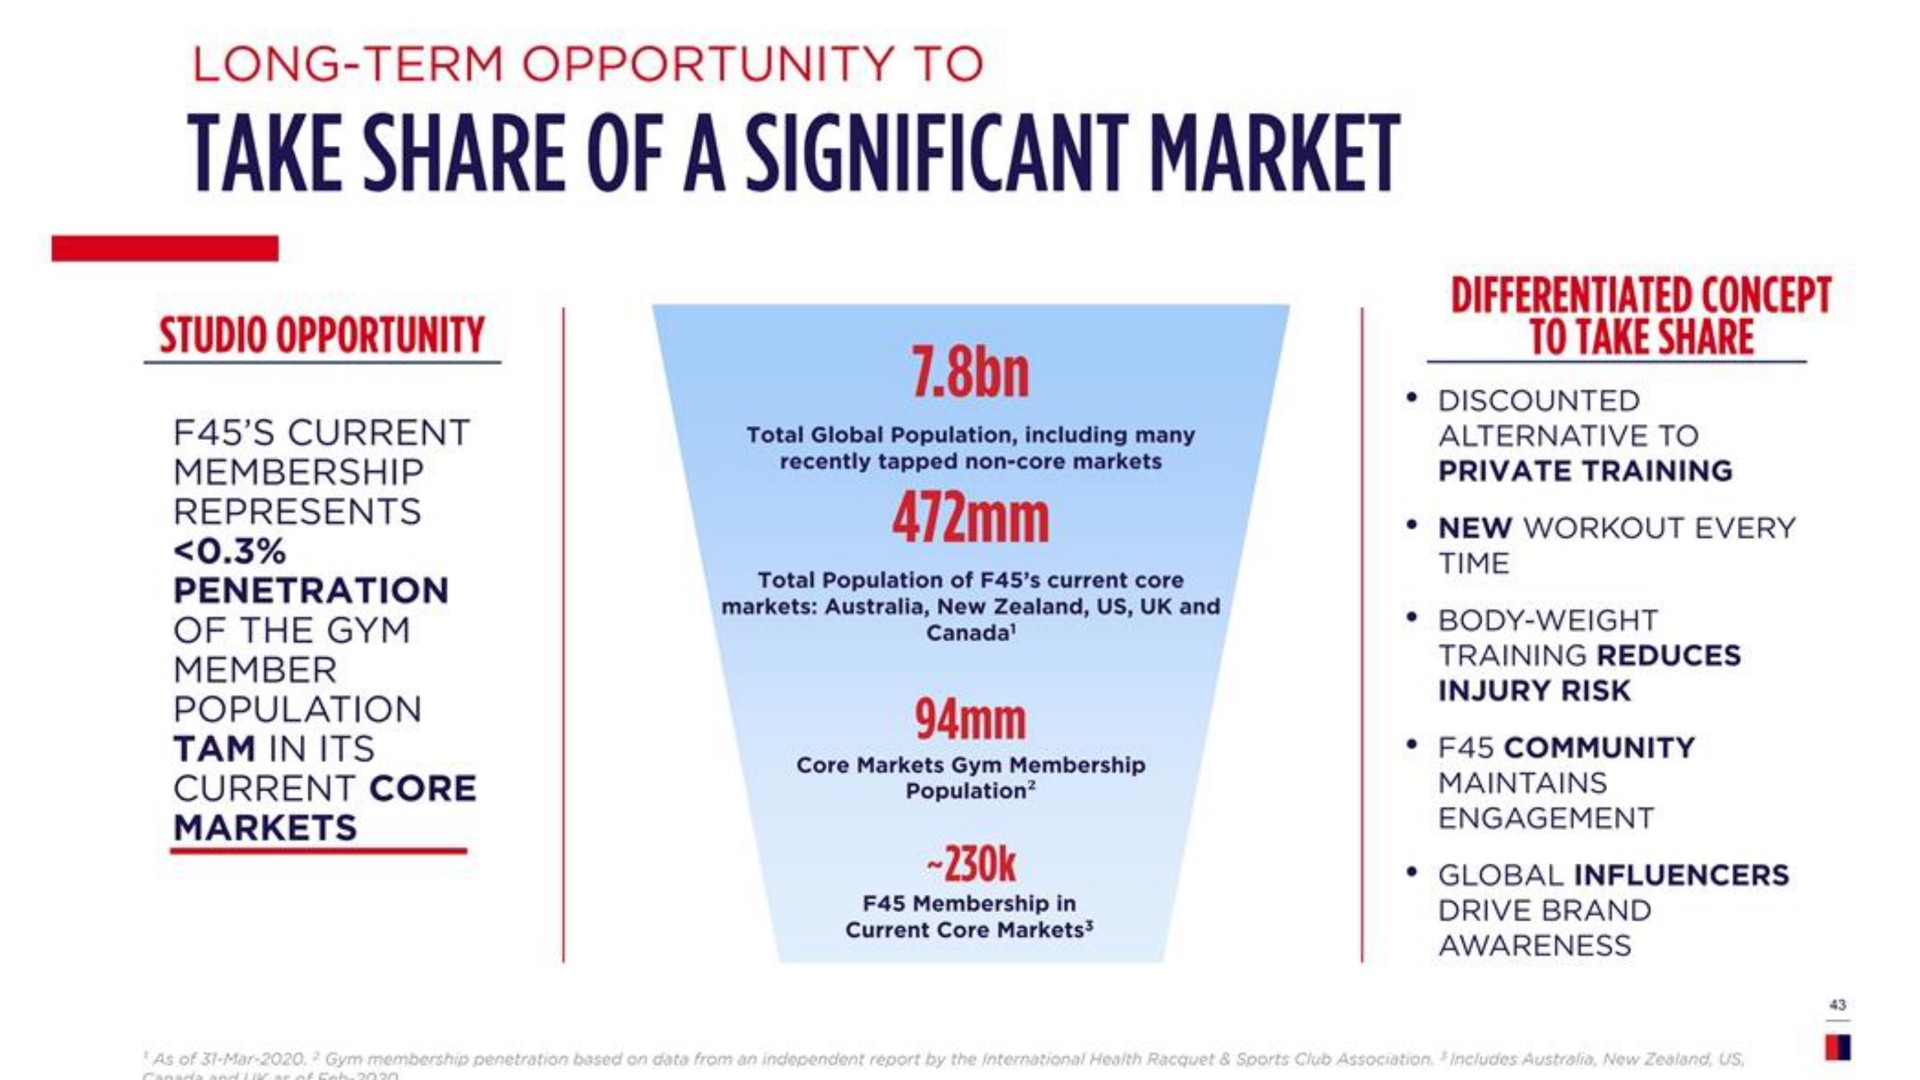 take share of a significant market training reduces | F45